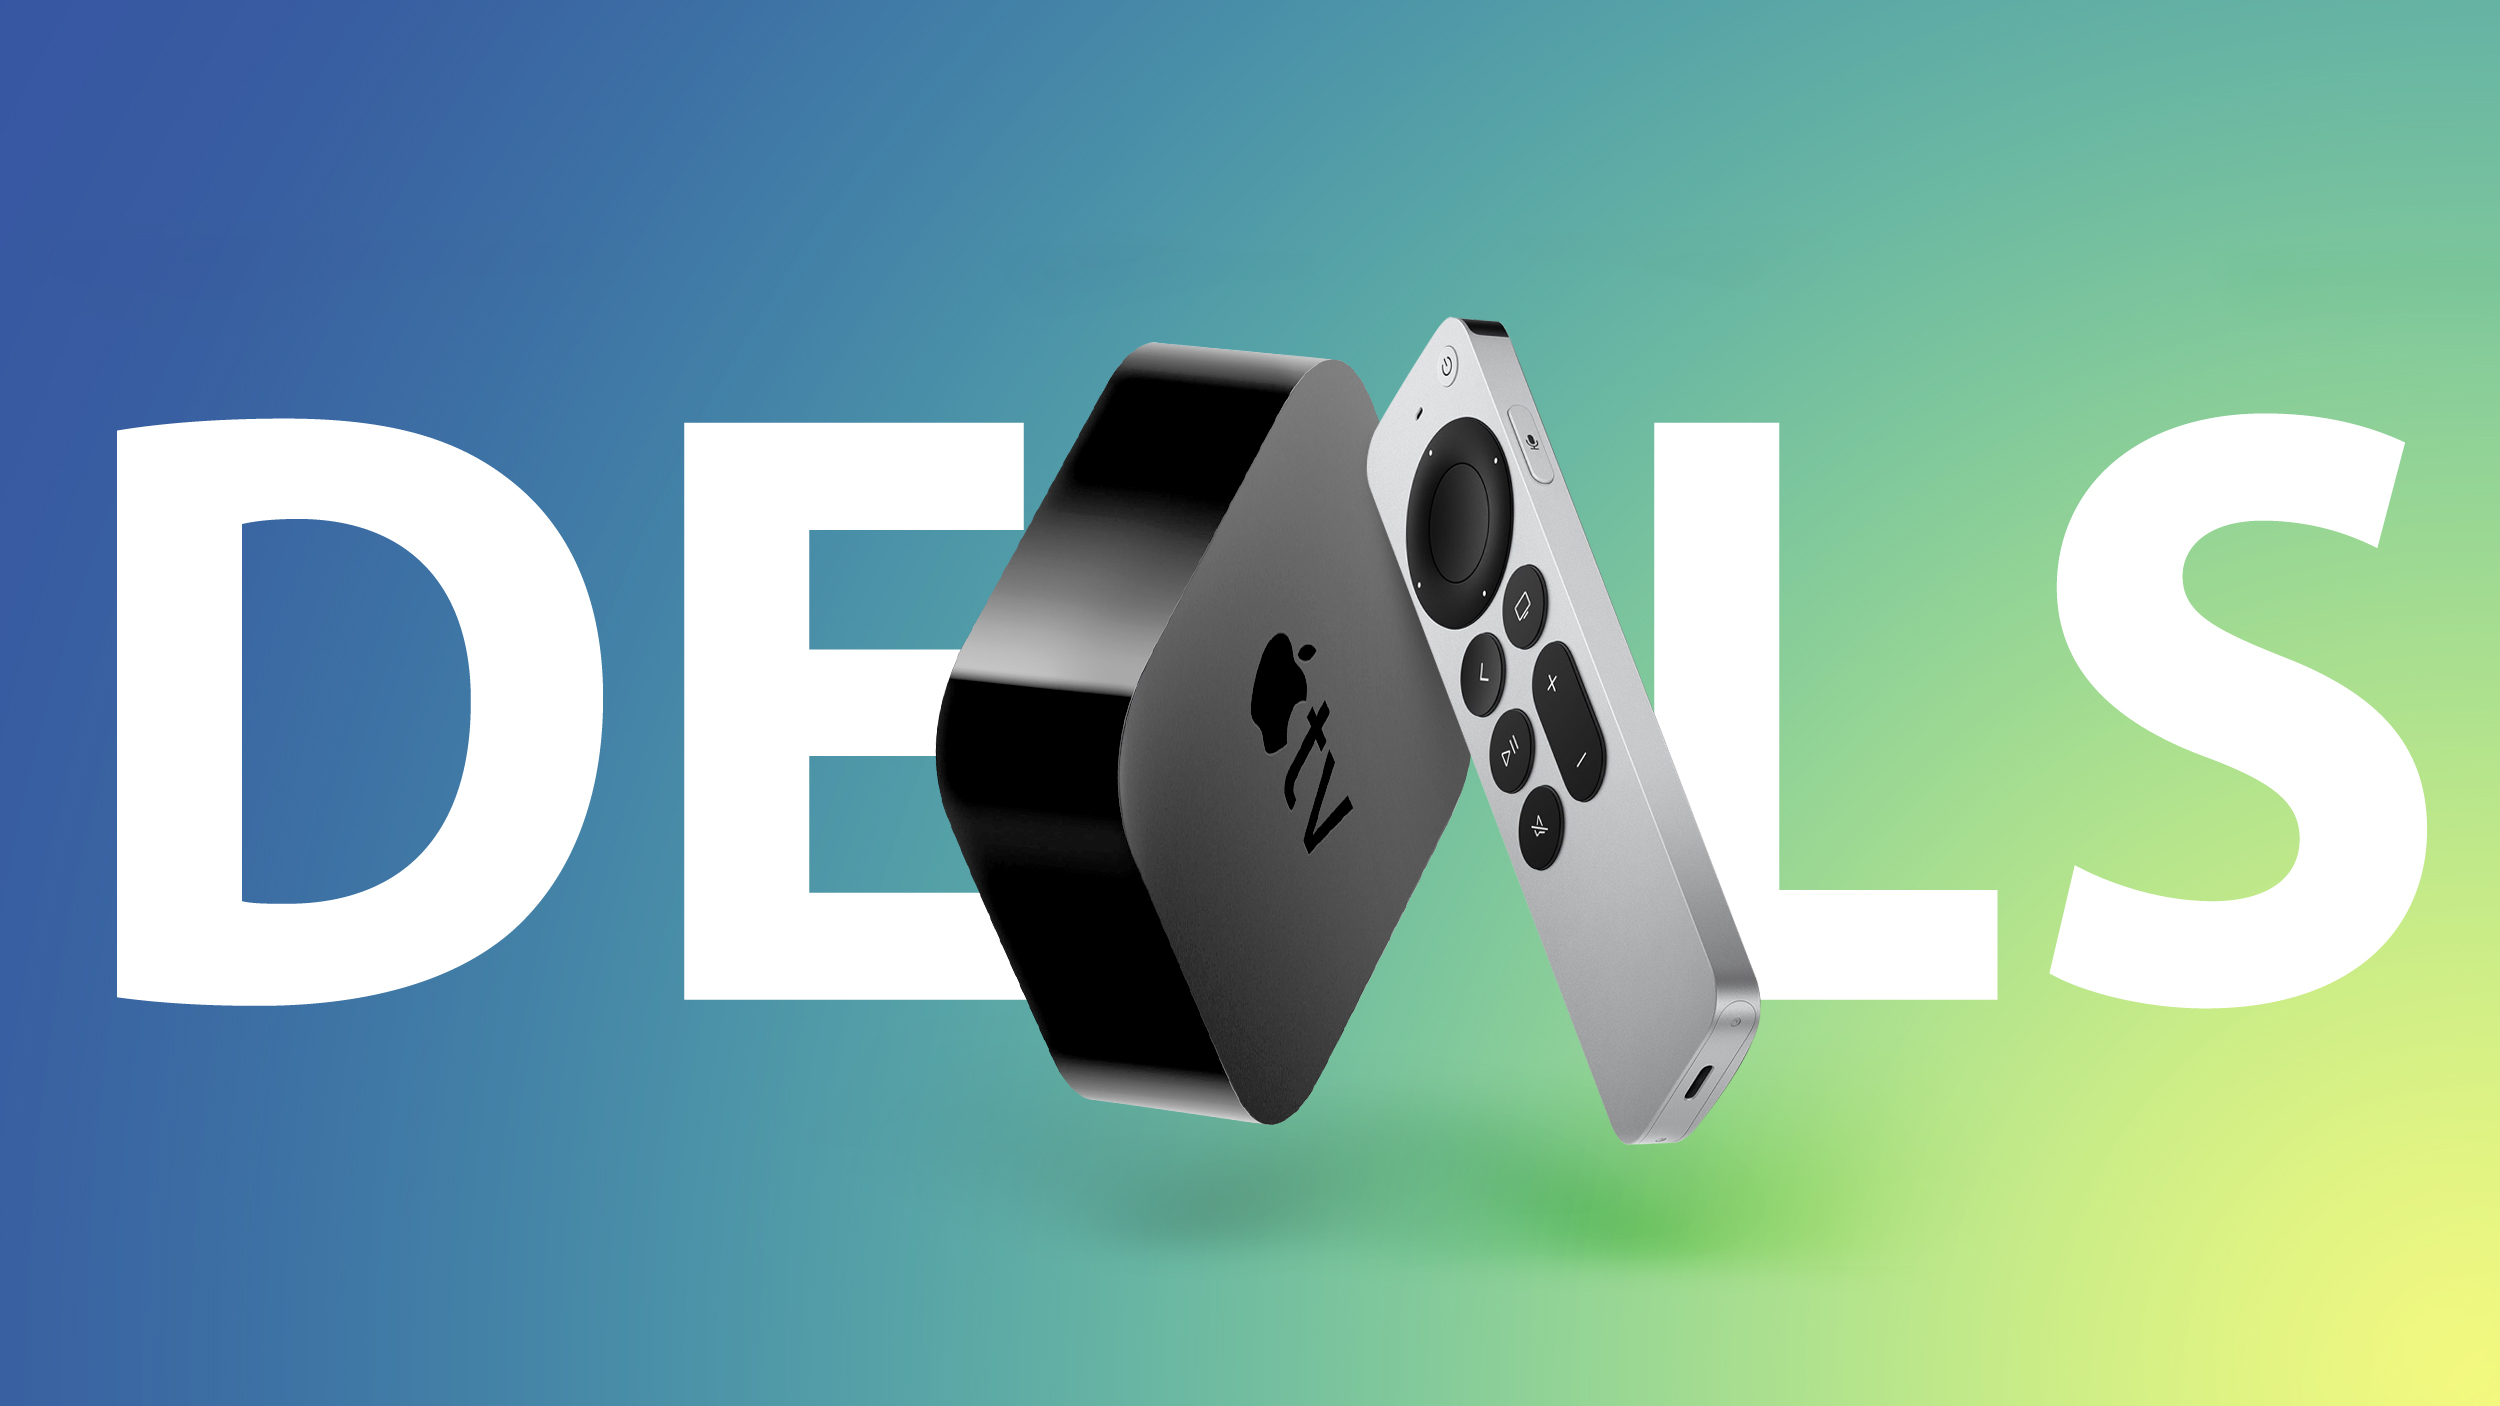 Deals: Amazon Now Has Both 32GB and 64GB Apple TV 4K Models for $59 Off, Starting at $119.99